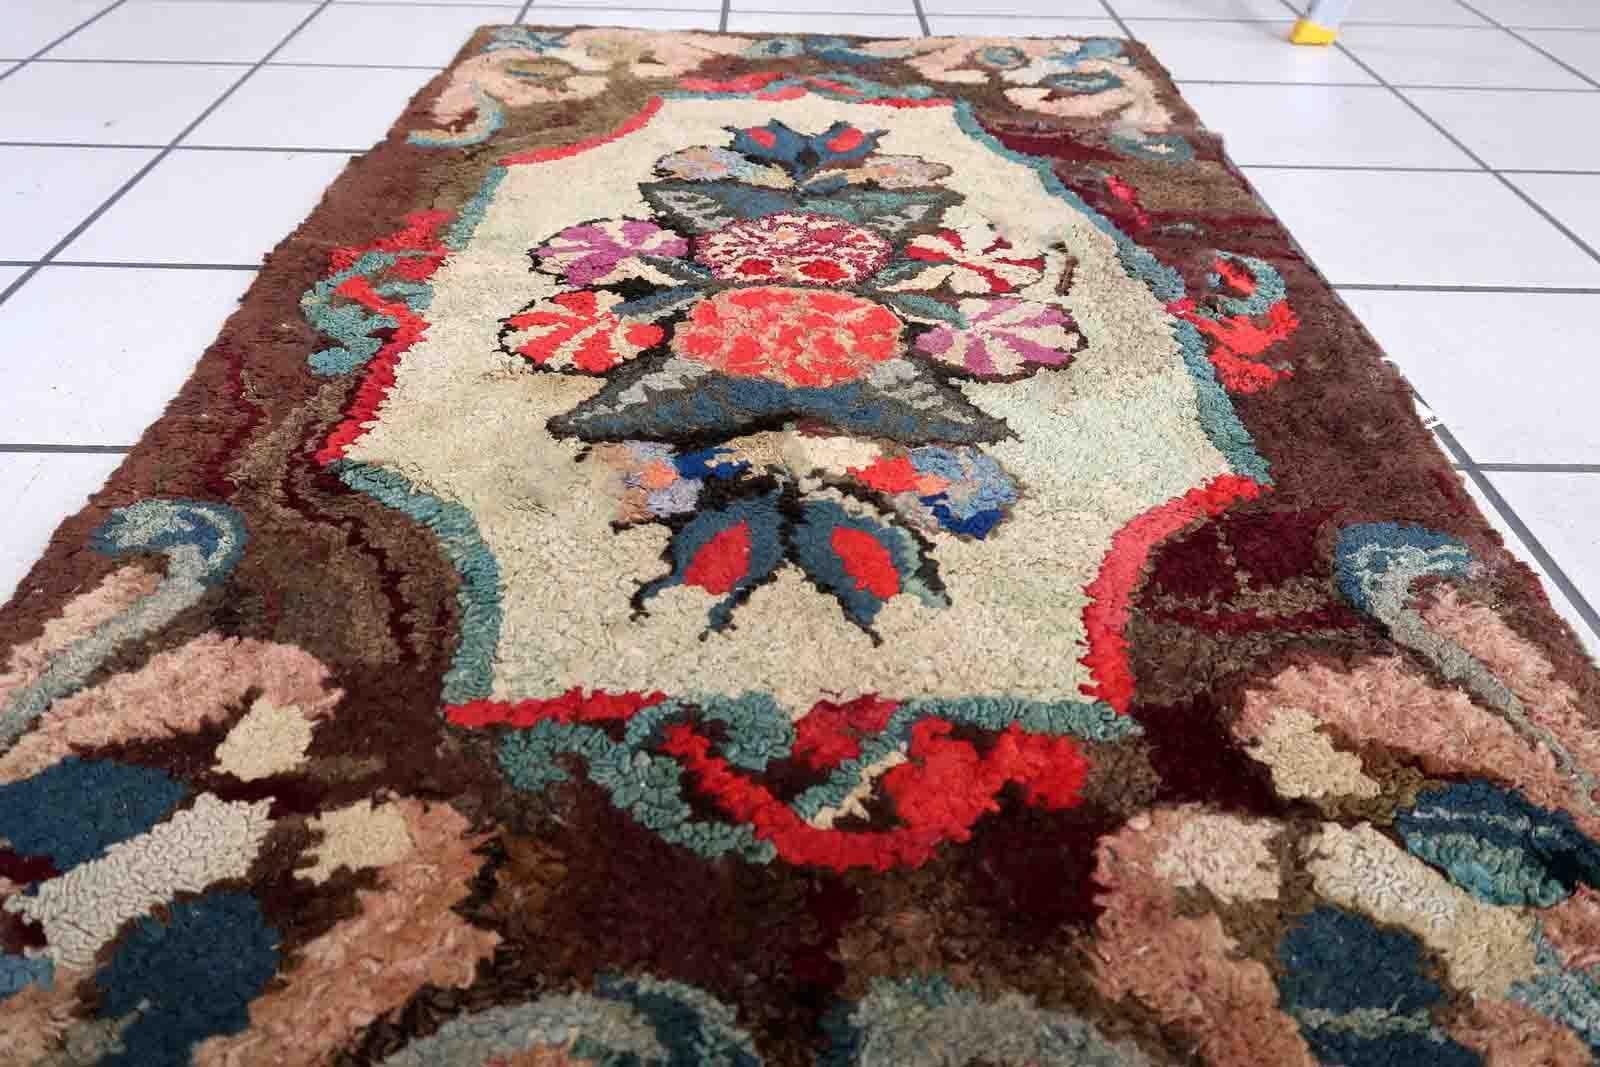 Handmade antique American Hooked rug in floral design. The rug is from the end of 19th century. It is in good condition, has some old restorations.

-condition: restored,

-circa: 1880s,

-size: 2' x 3.5' (63cm x 107cm),

-material: